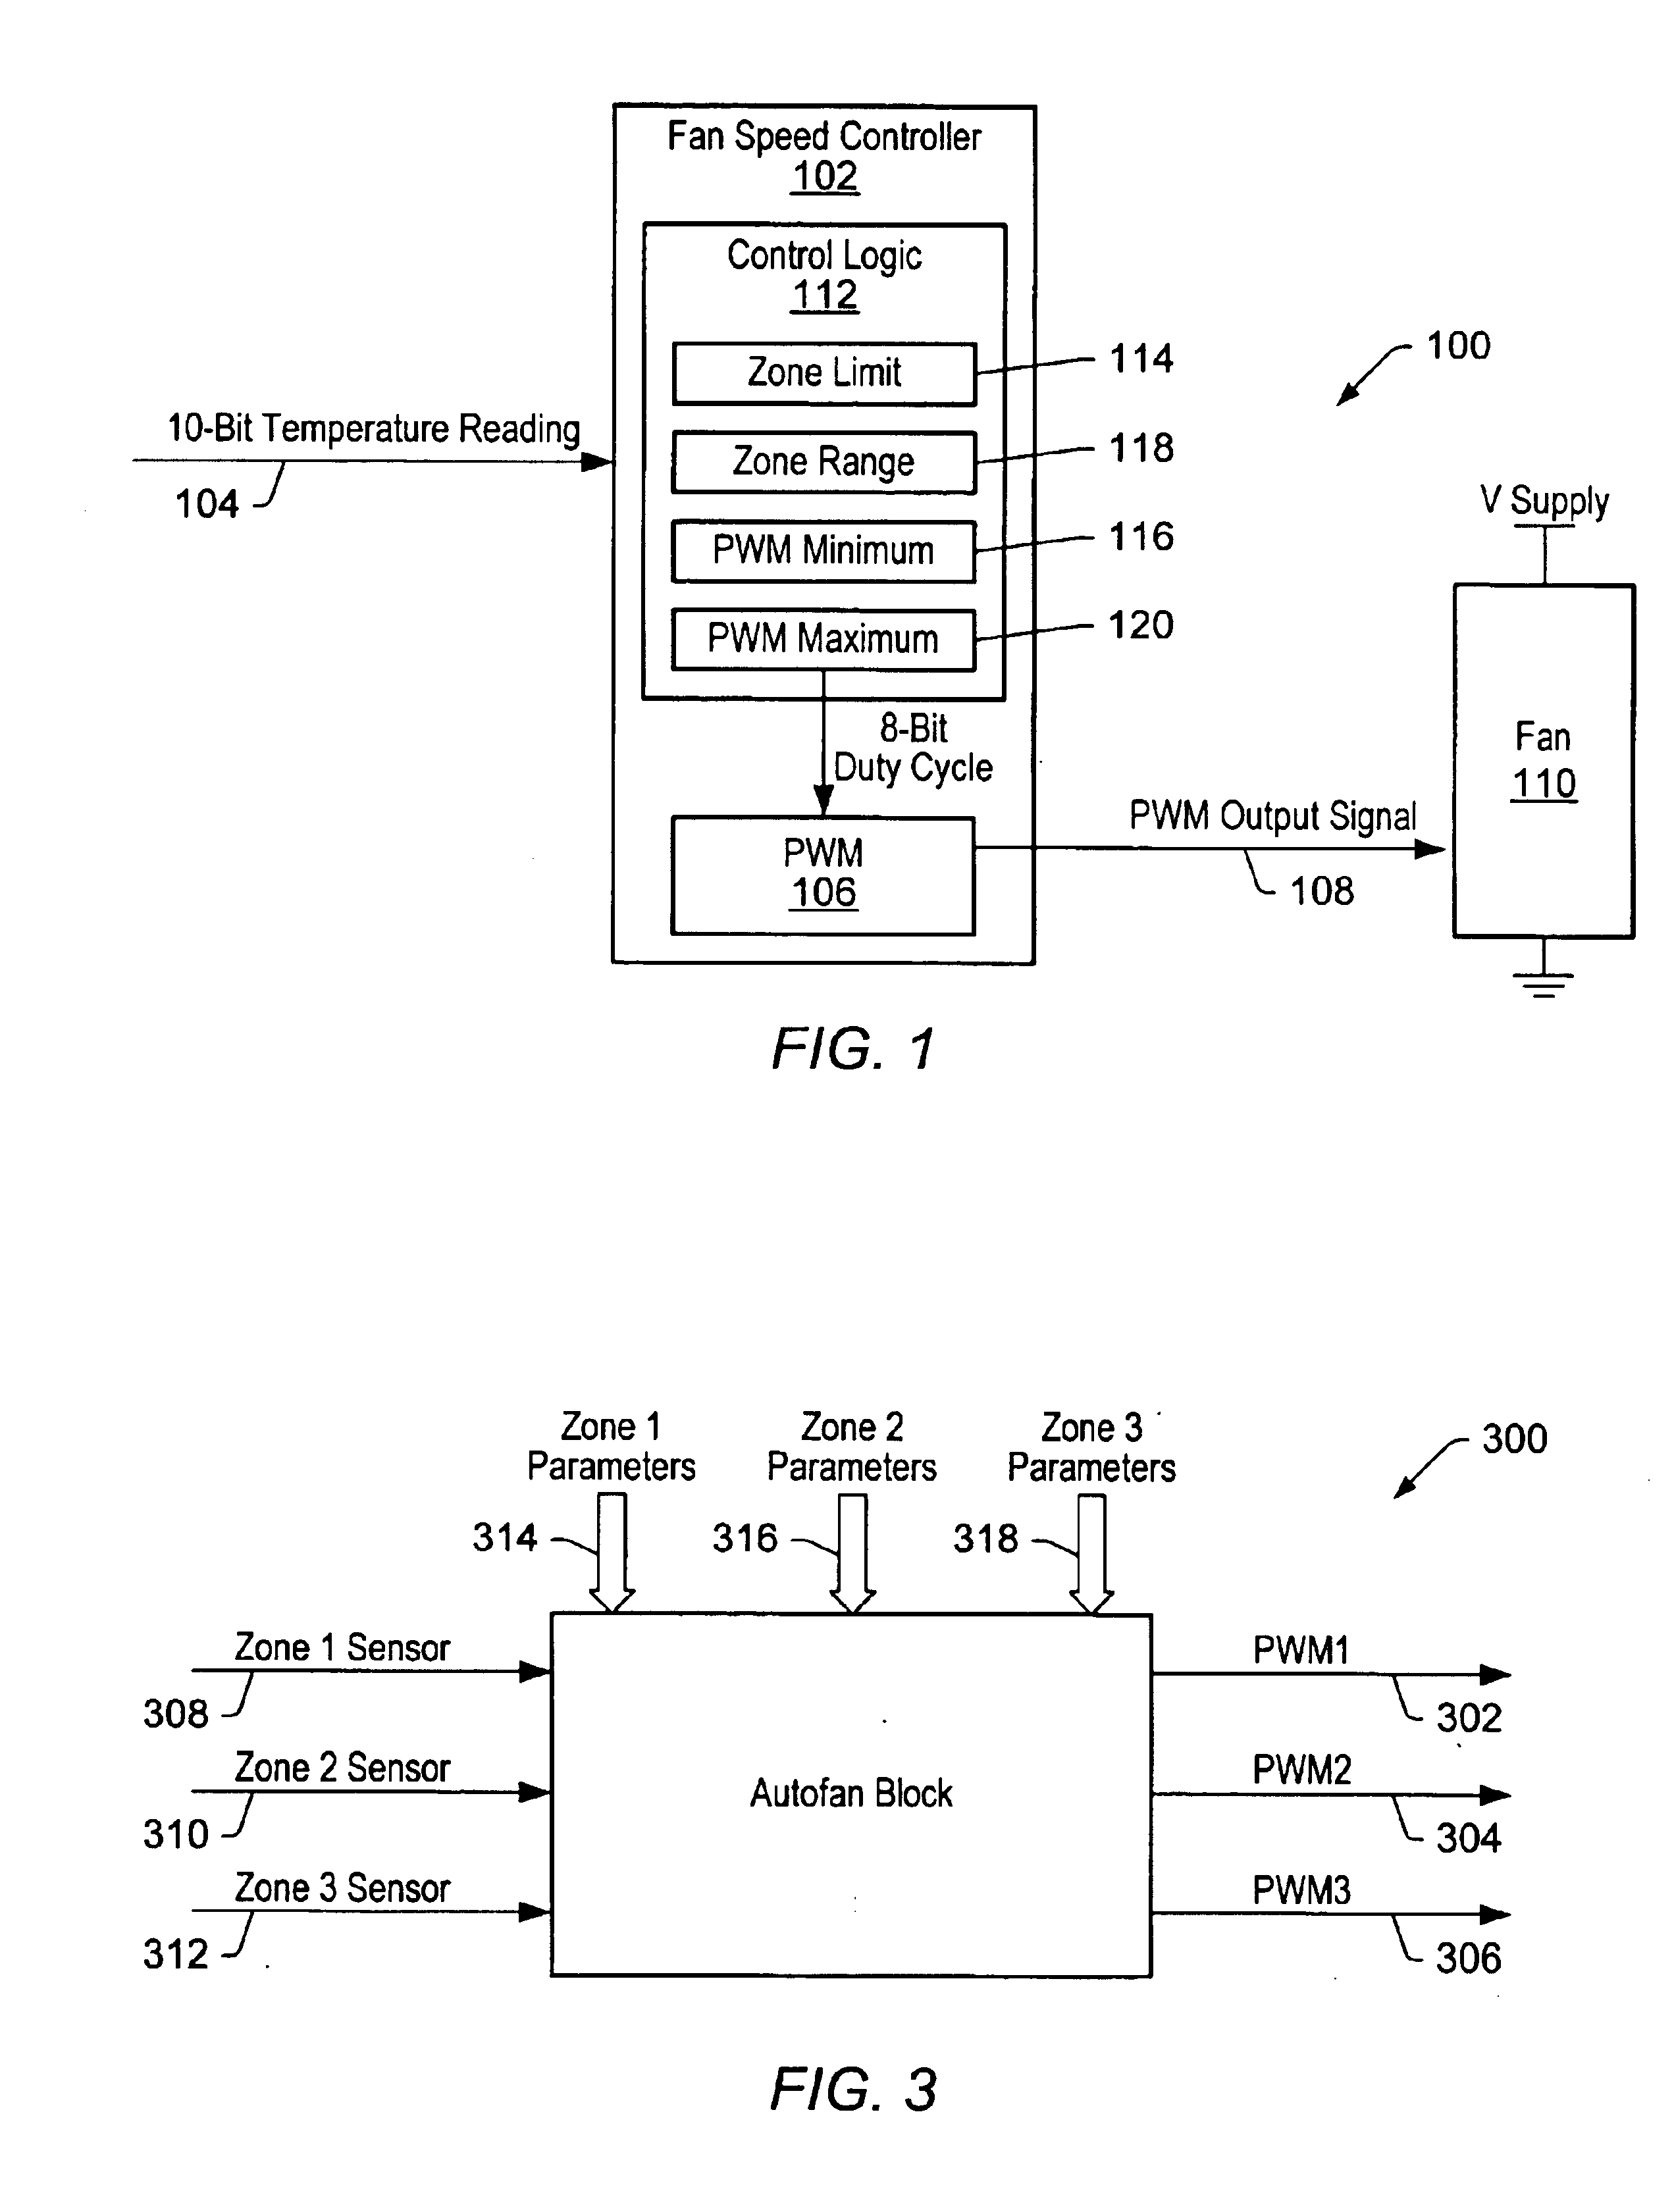 Fan control system with improved temperature resolution